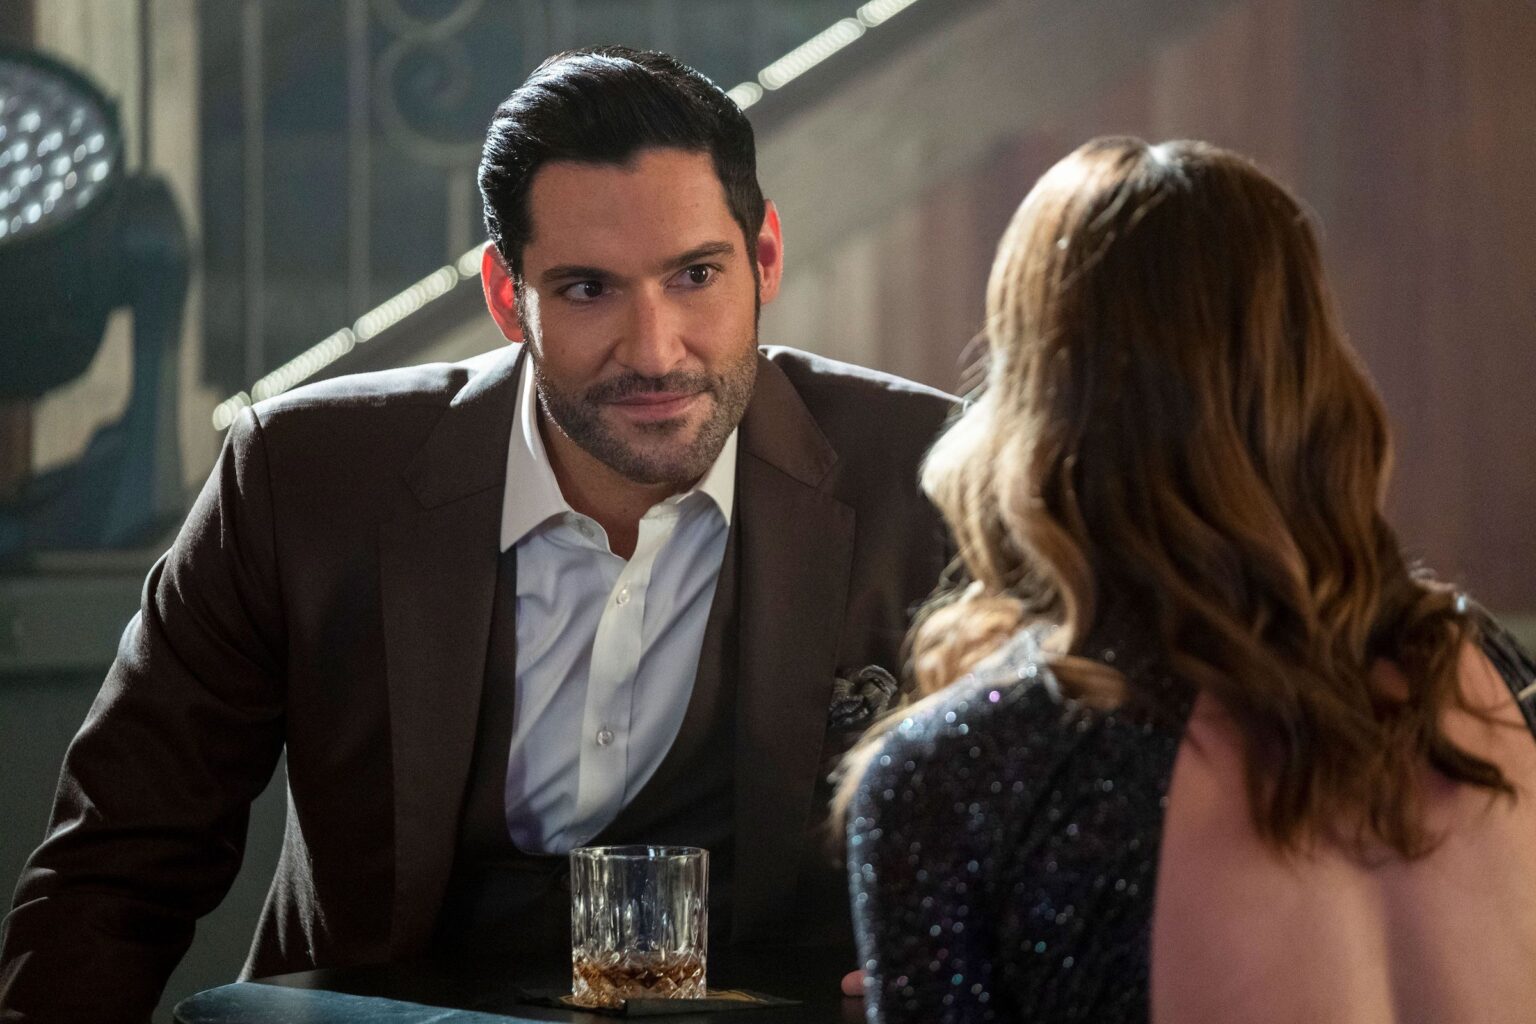 'Lucifer' has returned with its long-awaited back half of season 5. Here are the best Lucifer Morningstar moments so far.